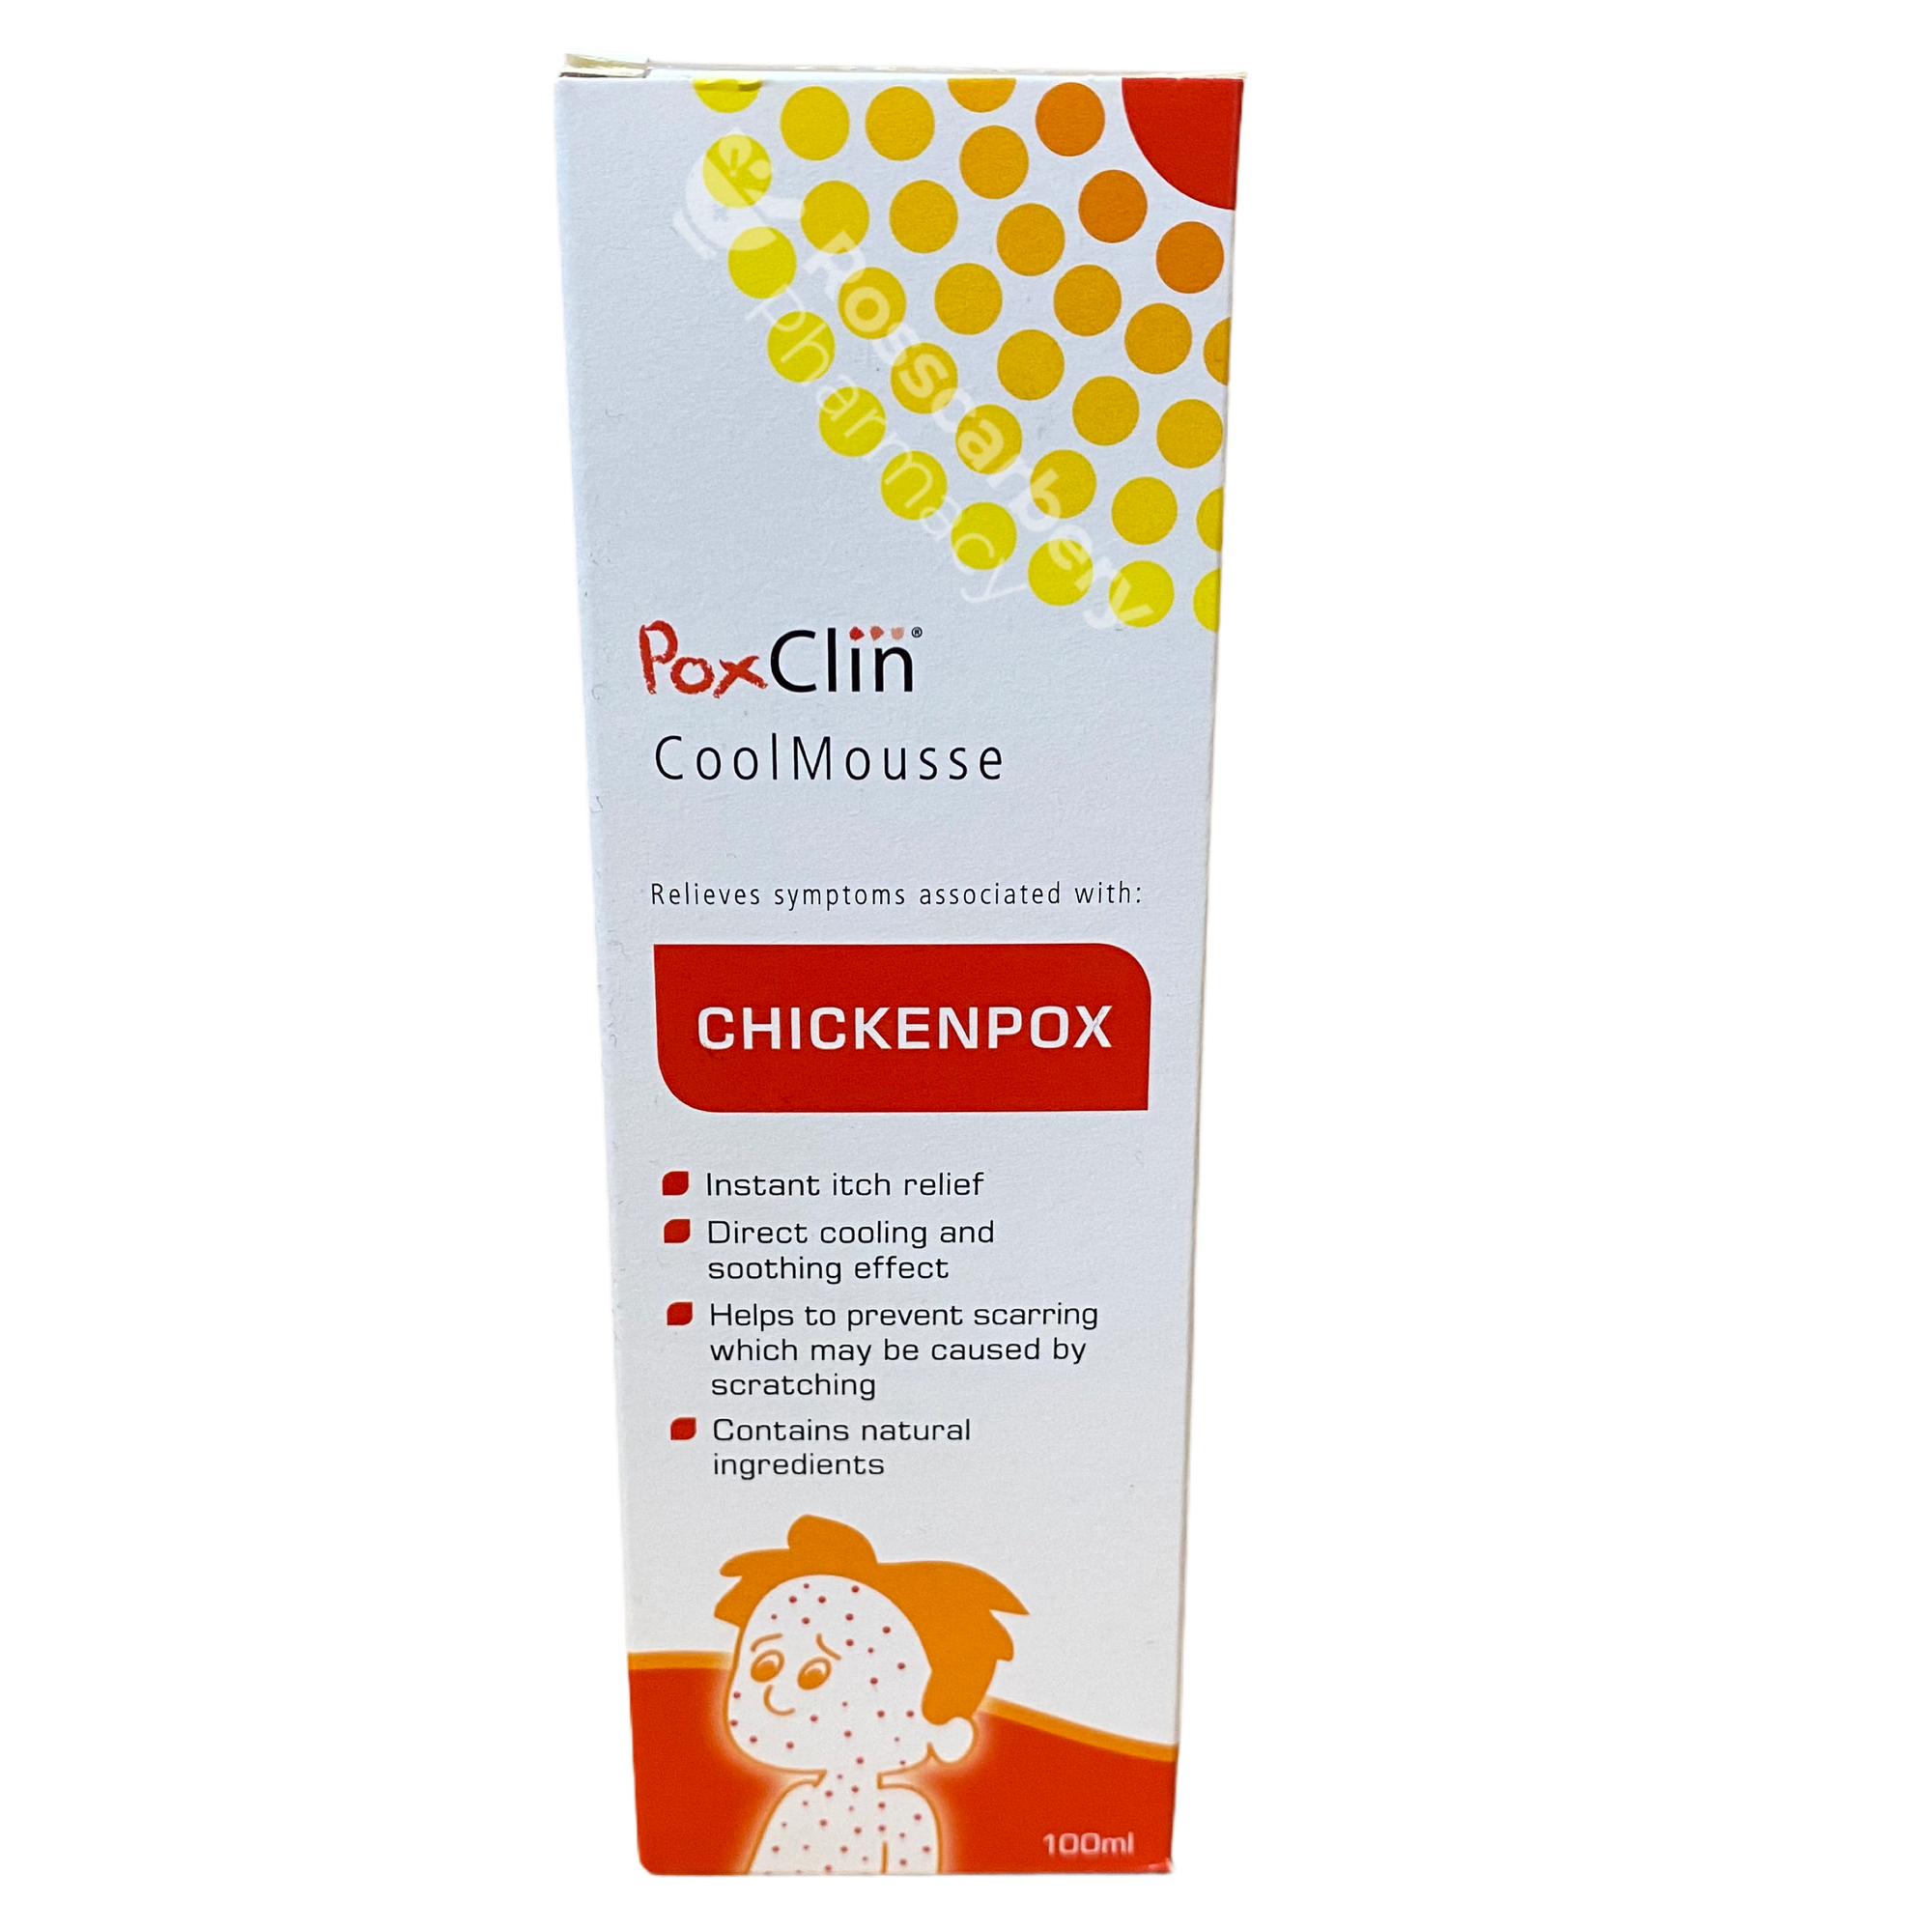 PoxClin Cool Mousse Chickenpox